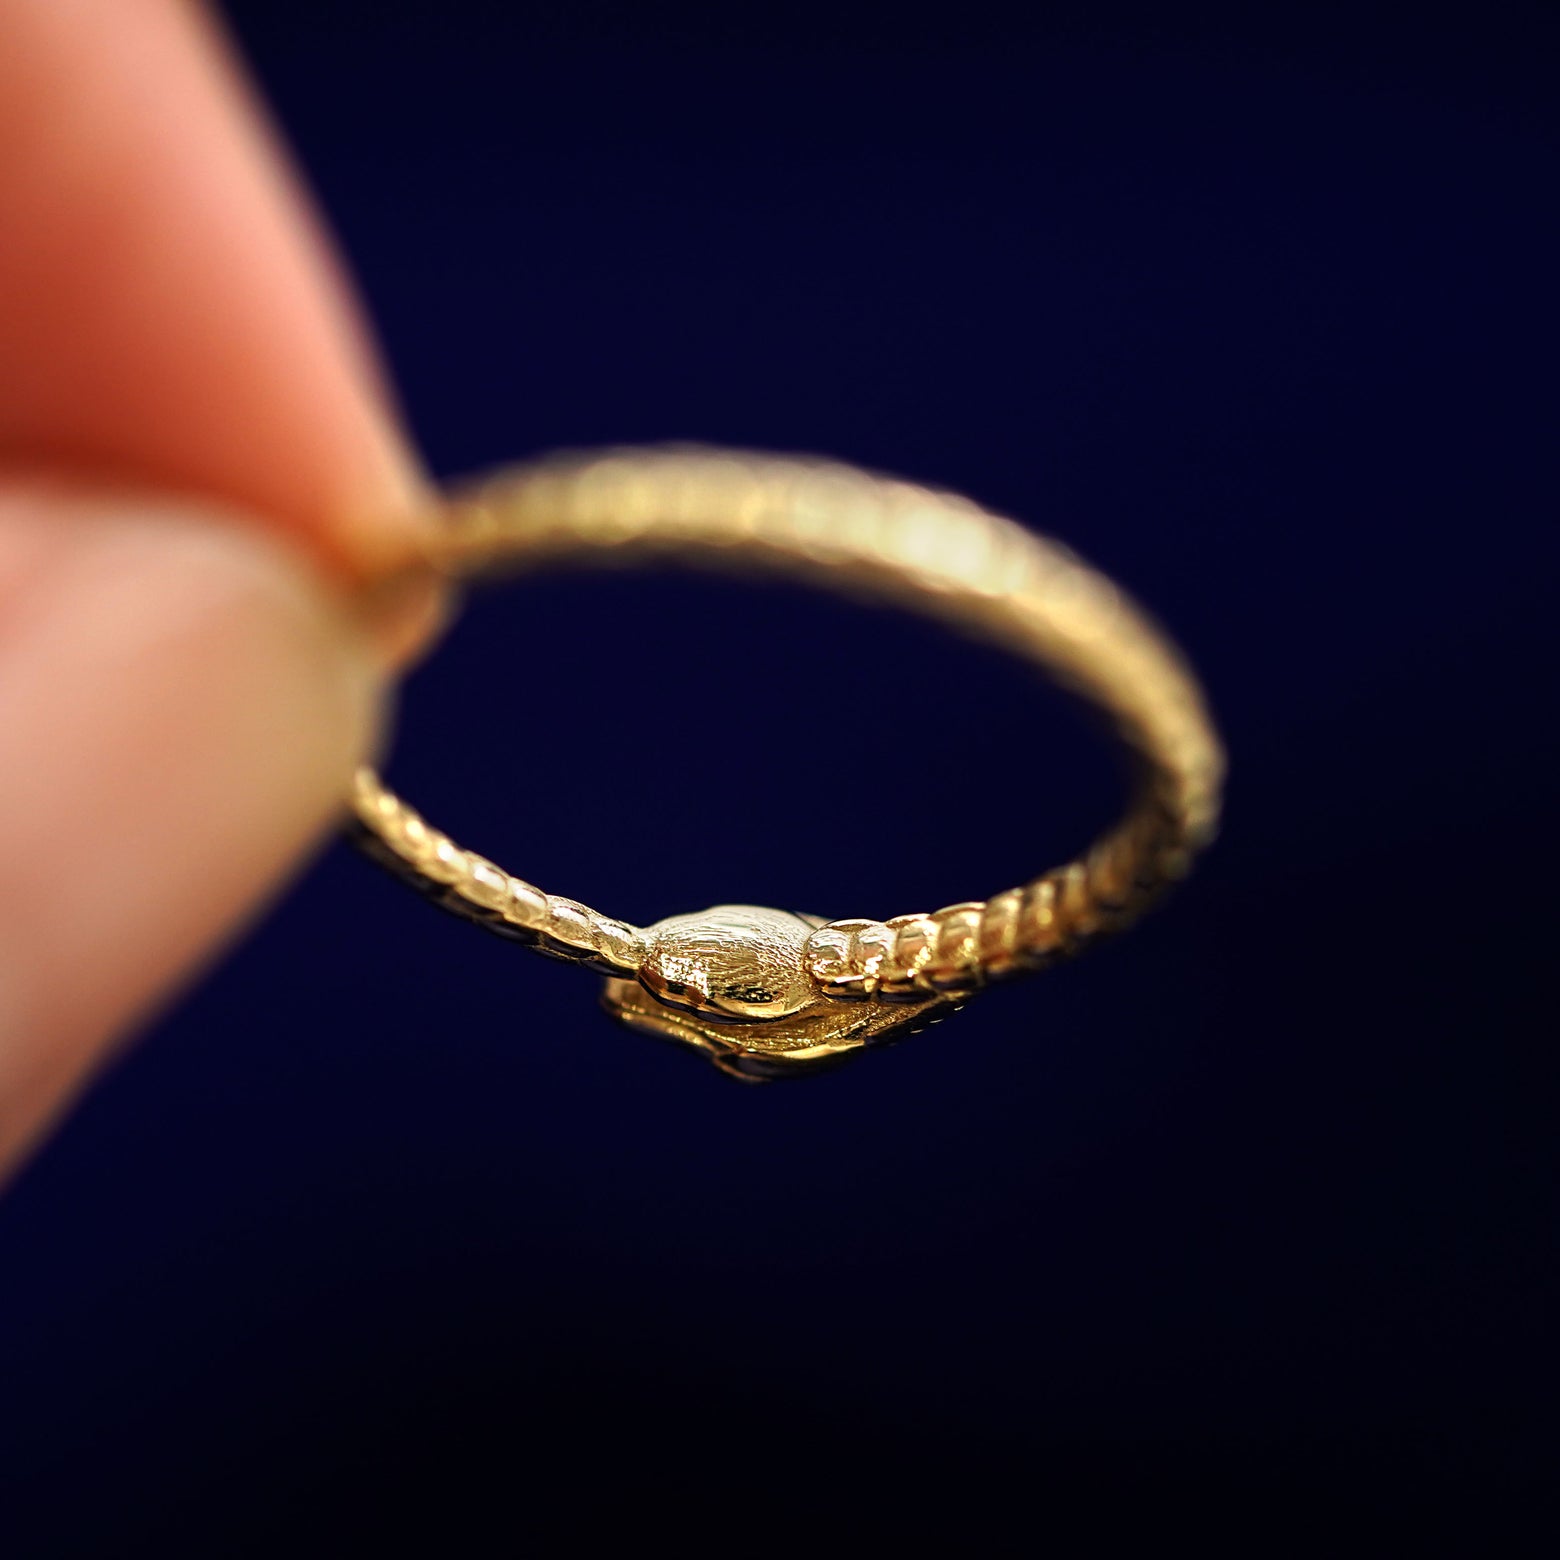 Underside view of a solid 14k gold Gemstone Ouroboros Snake Ring to show under the snake's head